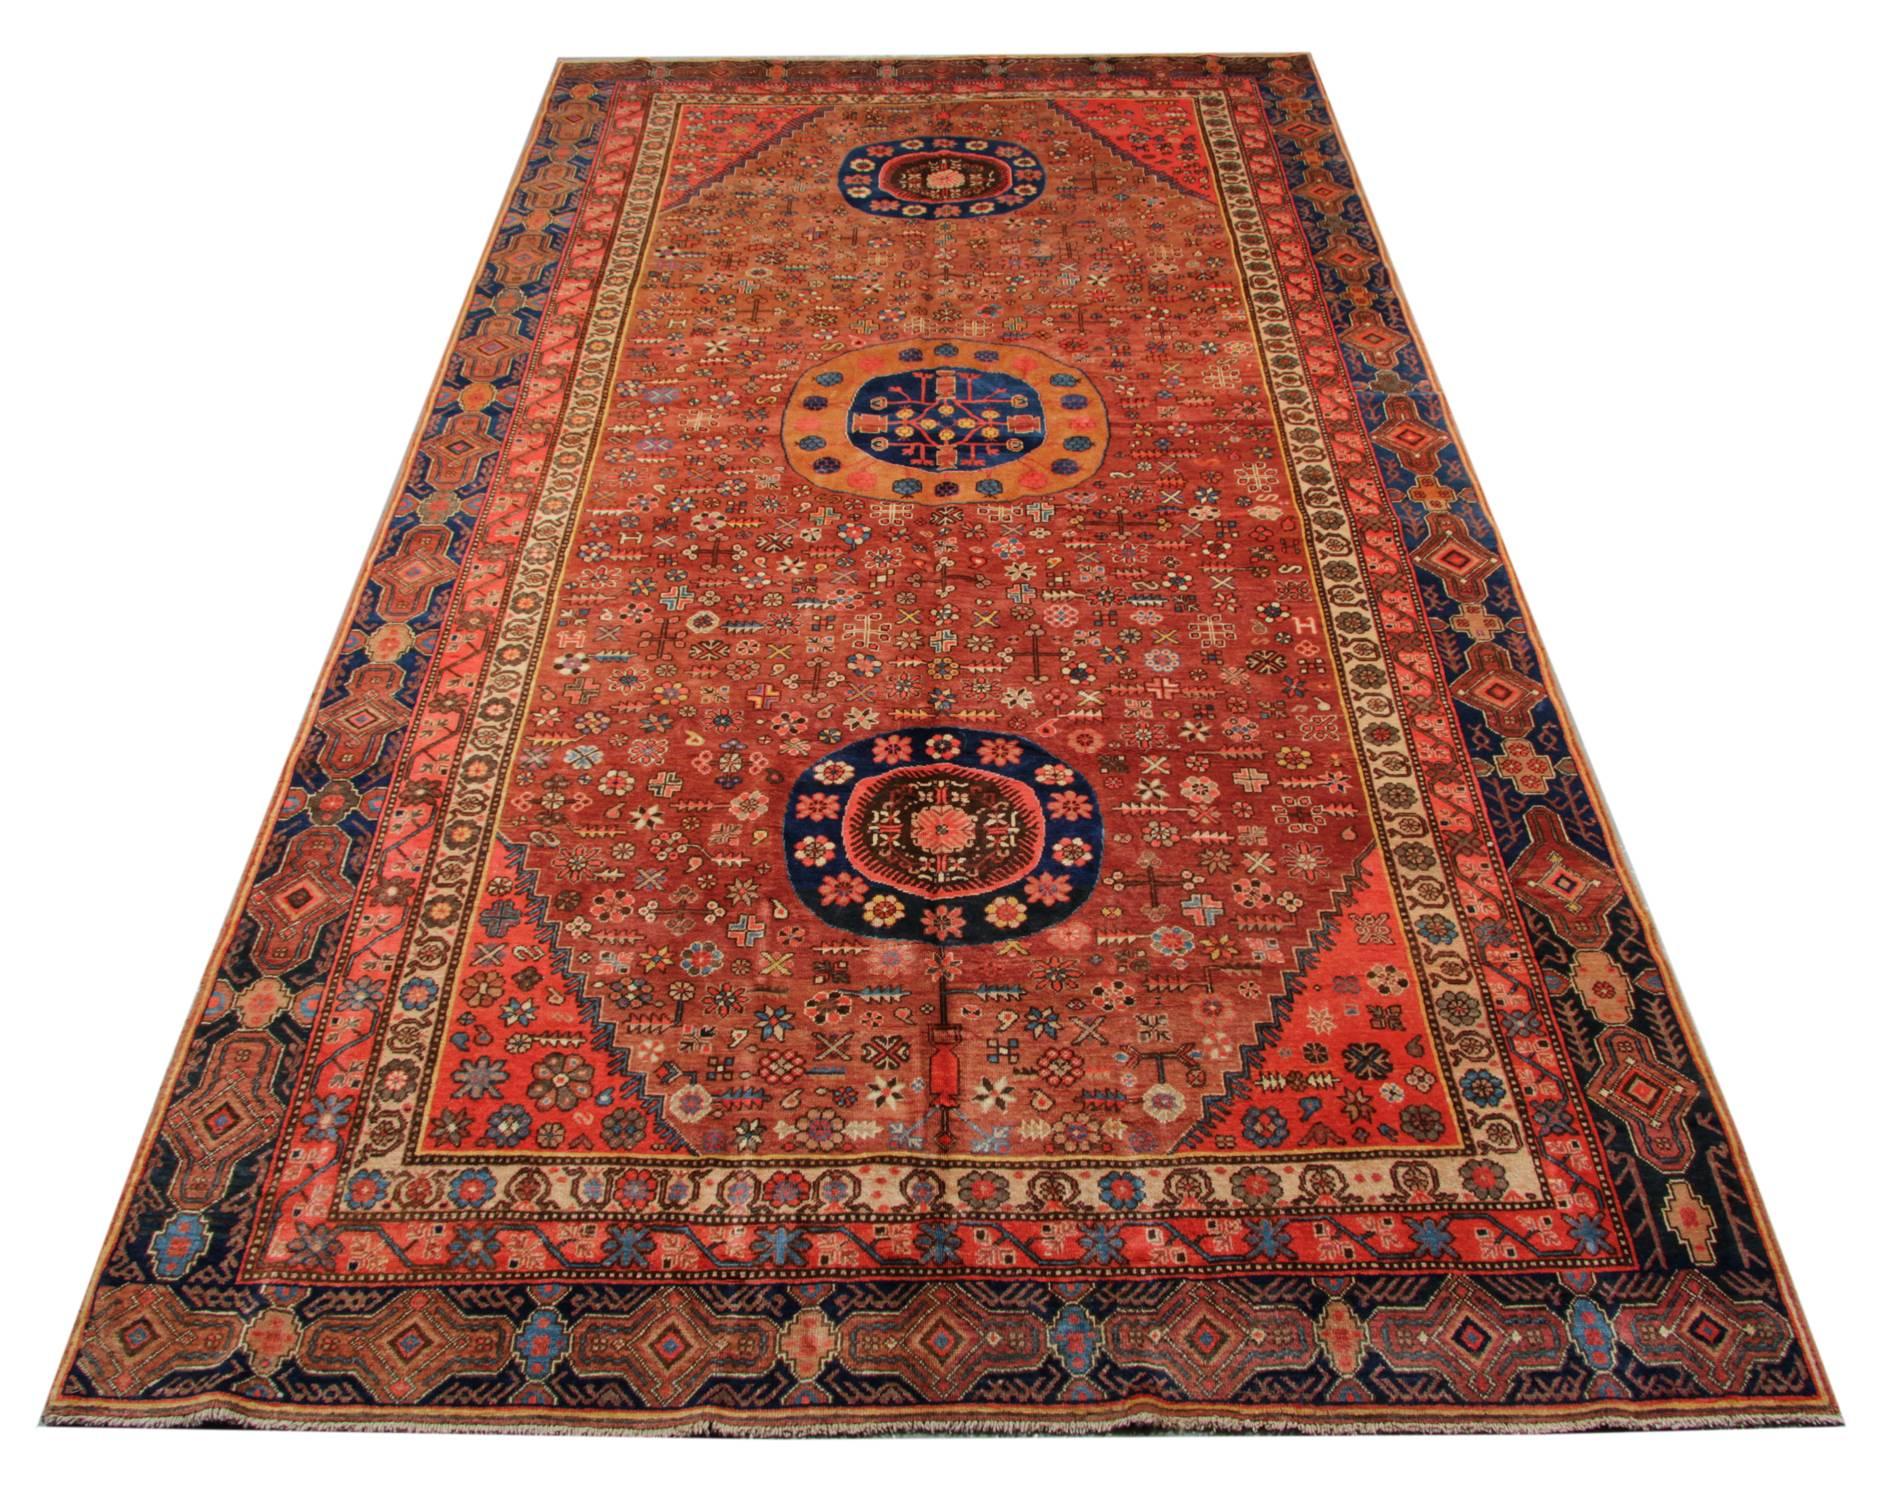 Oriental carpets from Khotan have a style that is all their own. This orange rug has three beautiful circulars medallions and lots of beautiful historical motives on the rust field. This large rug for sale has a very nice color combination in the